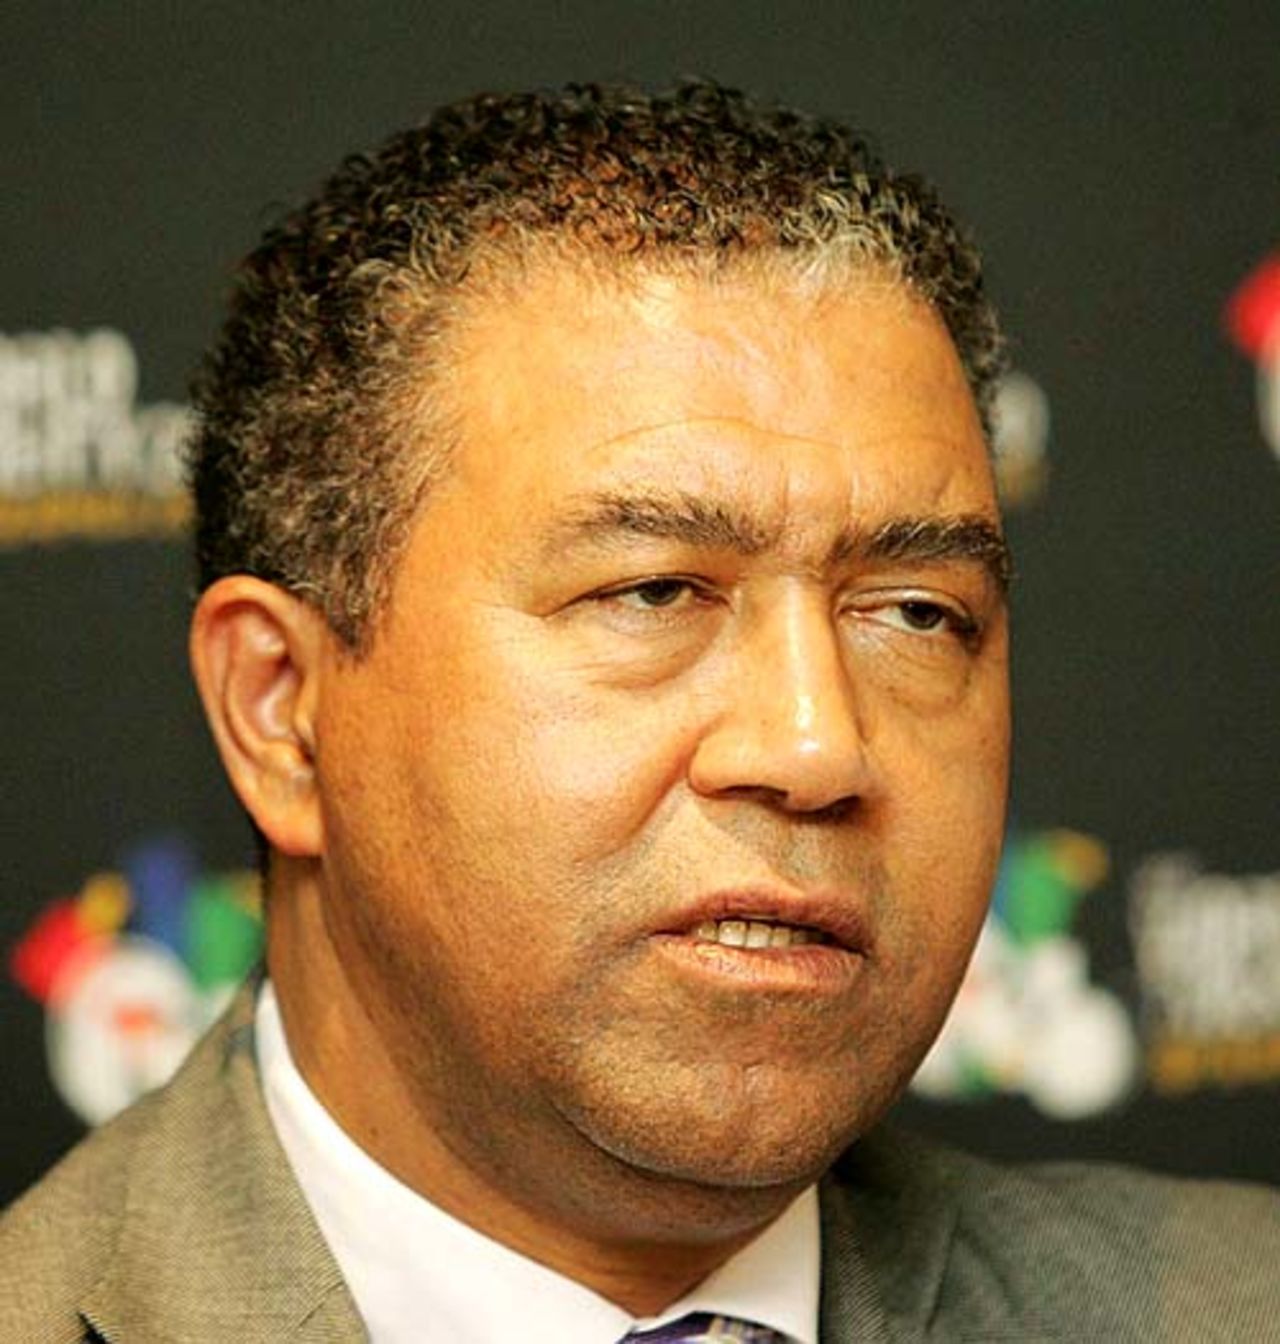 Norman Arendse, the president of Cricket South Africa, at the launch of the Twenty20 World Championships, Johannesburg, July 26, 2007